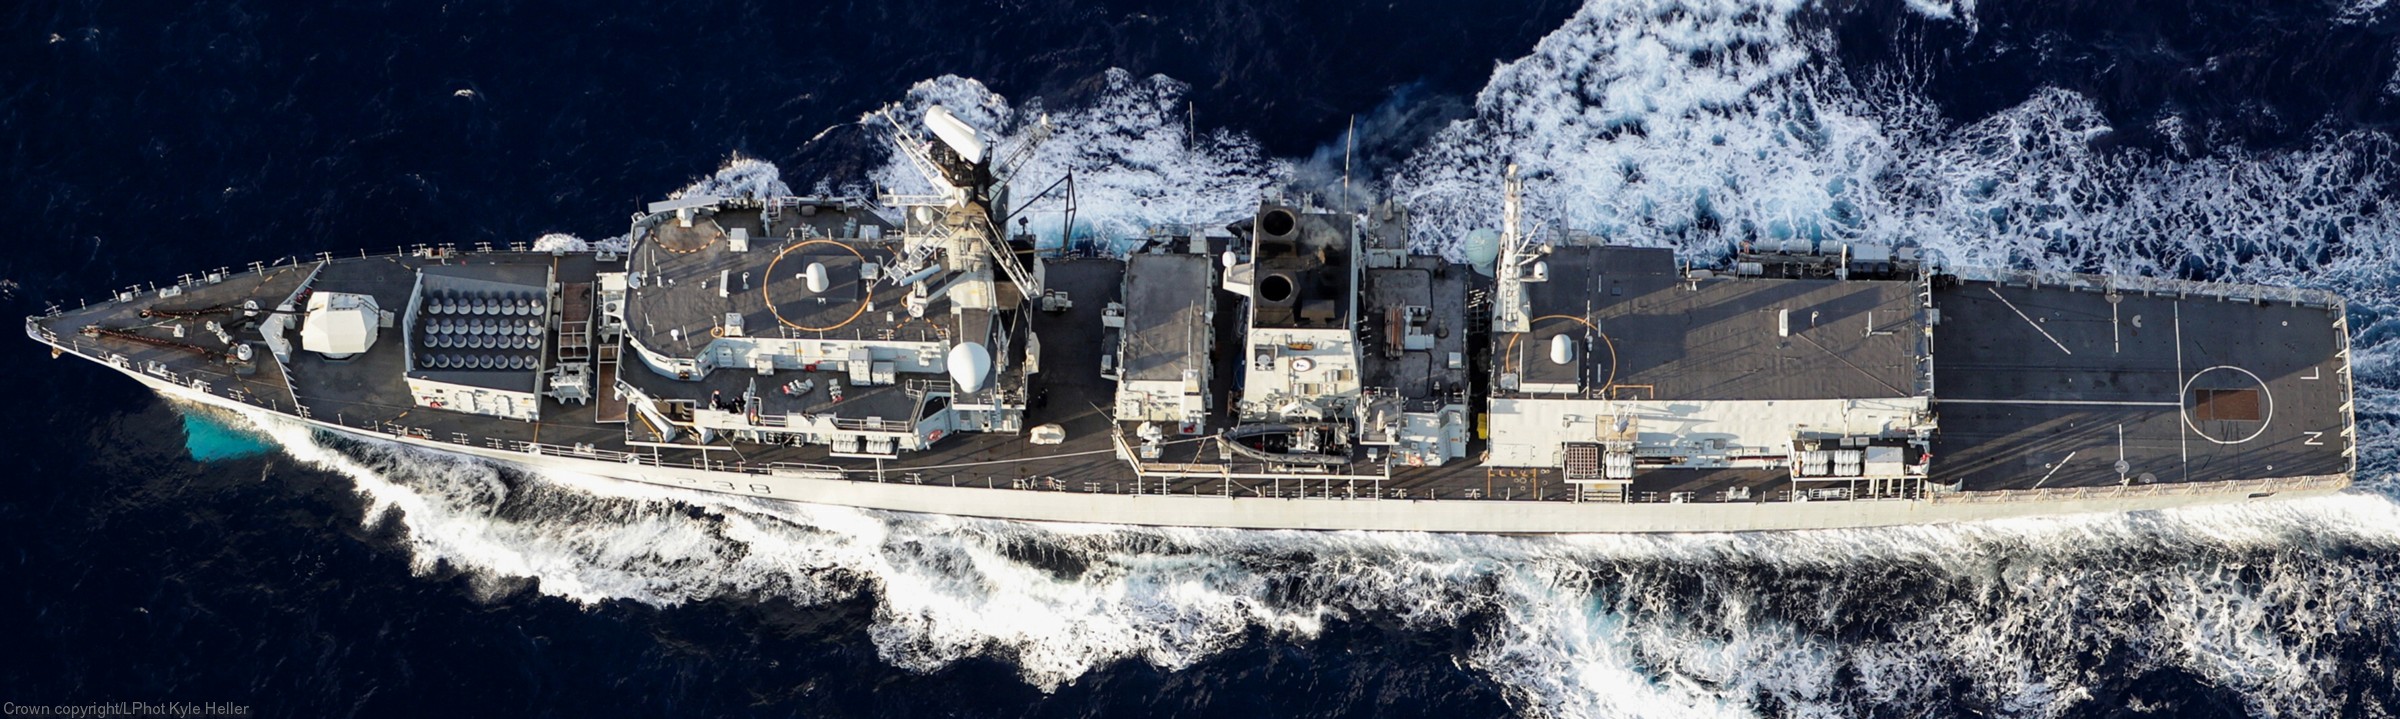 f-238 hms northumberland type 23 duke class guided missile frigate royal navy 38